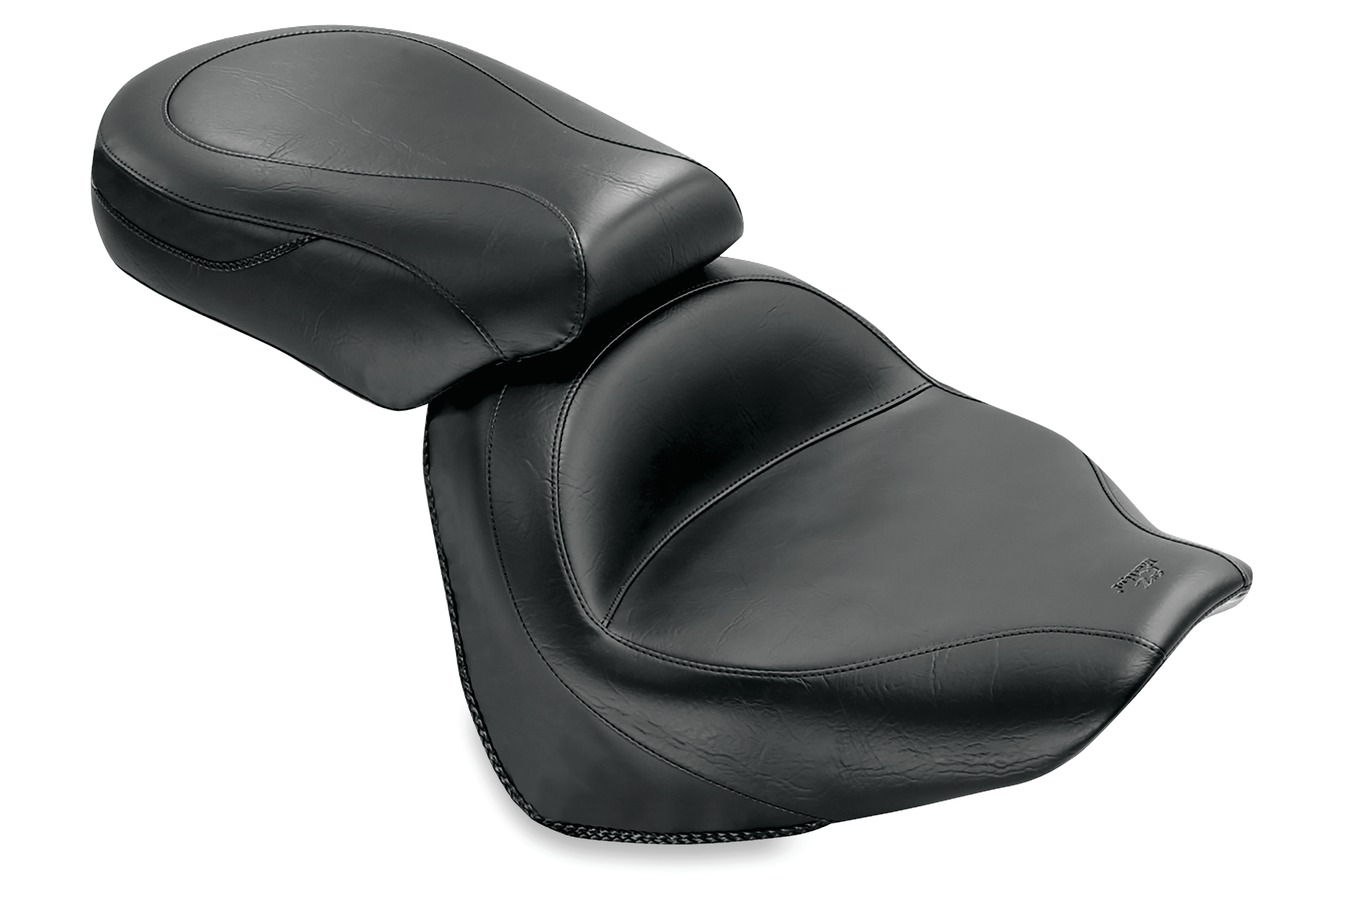 Wide Touring Two-Piece Seat for Honda VTX1300 Retro, S & T 2002-